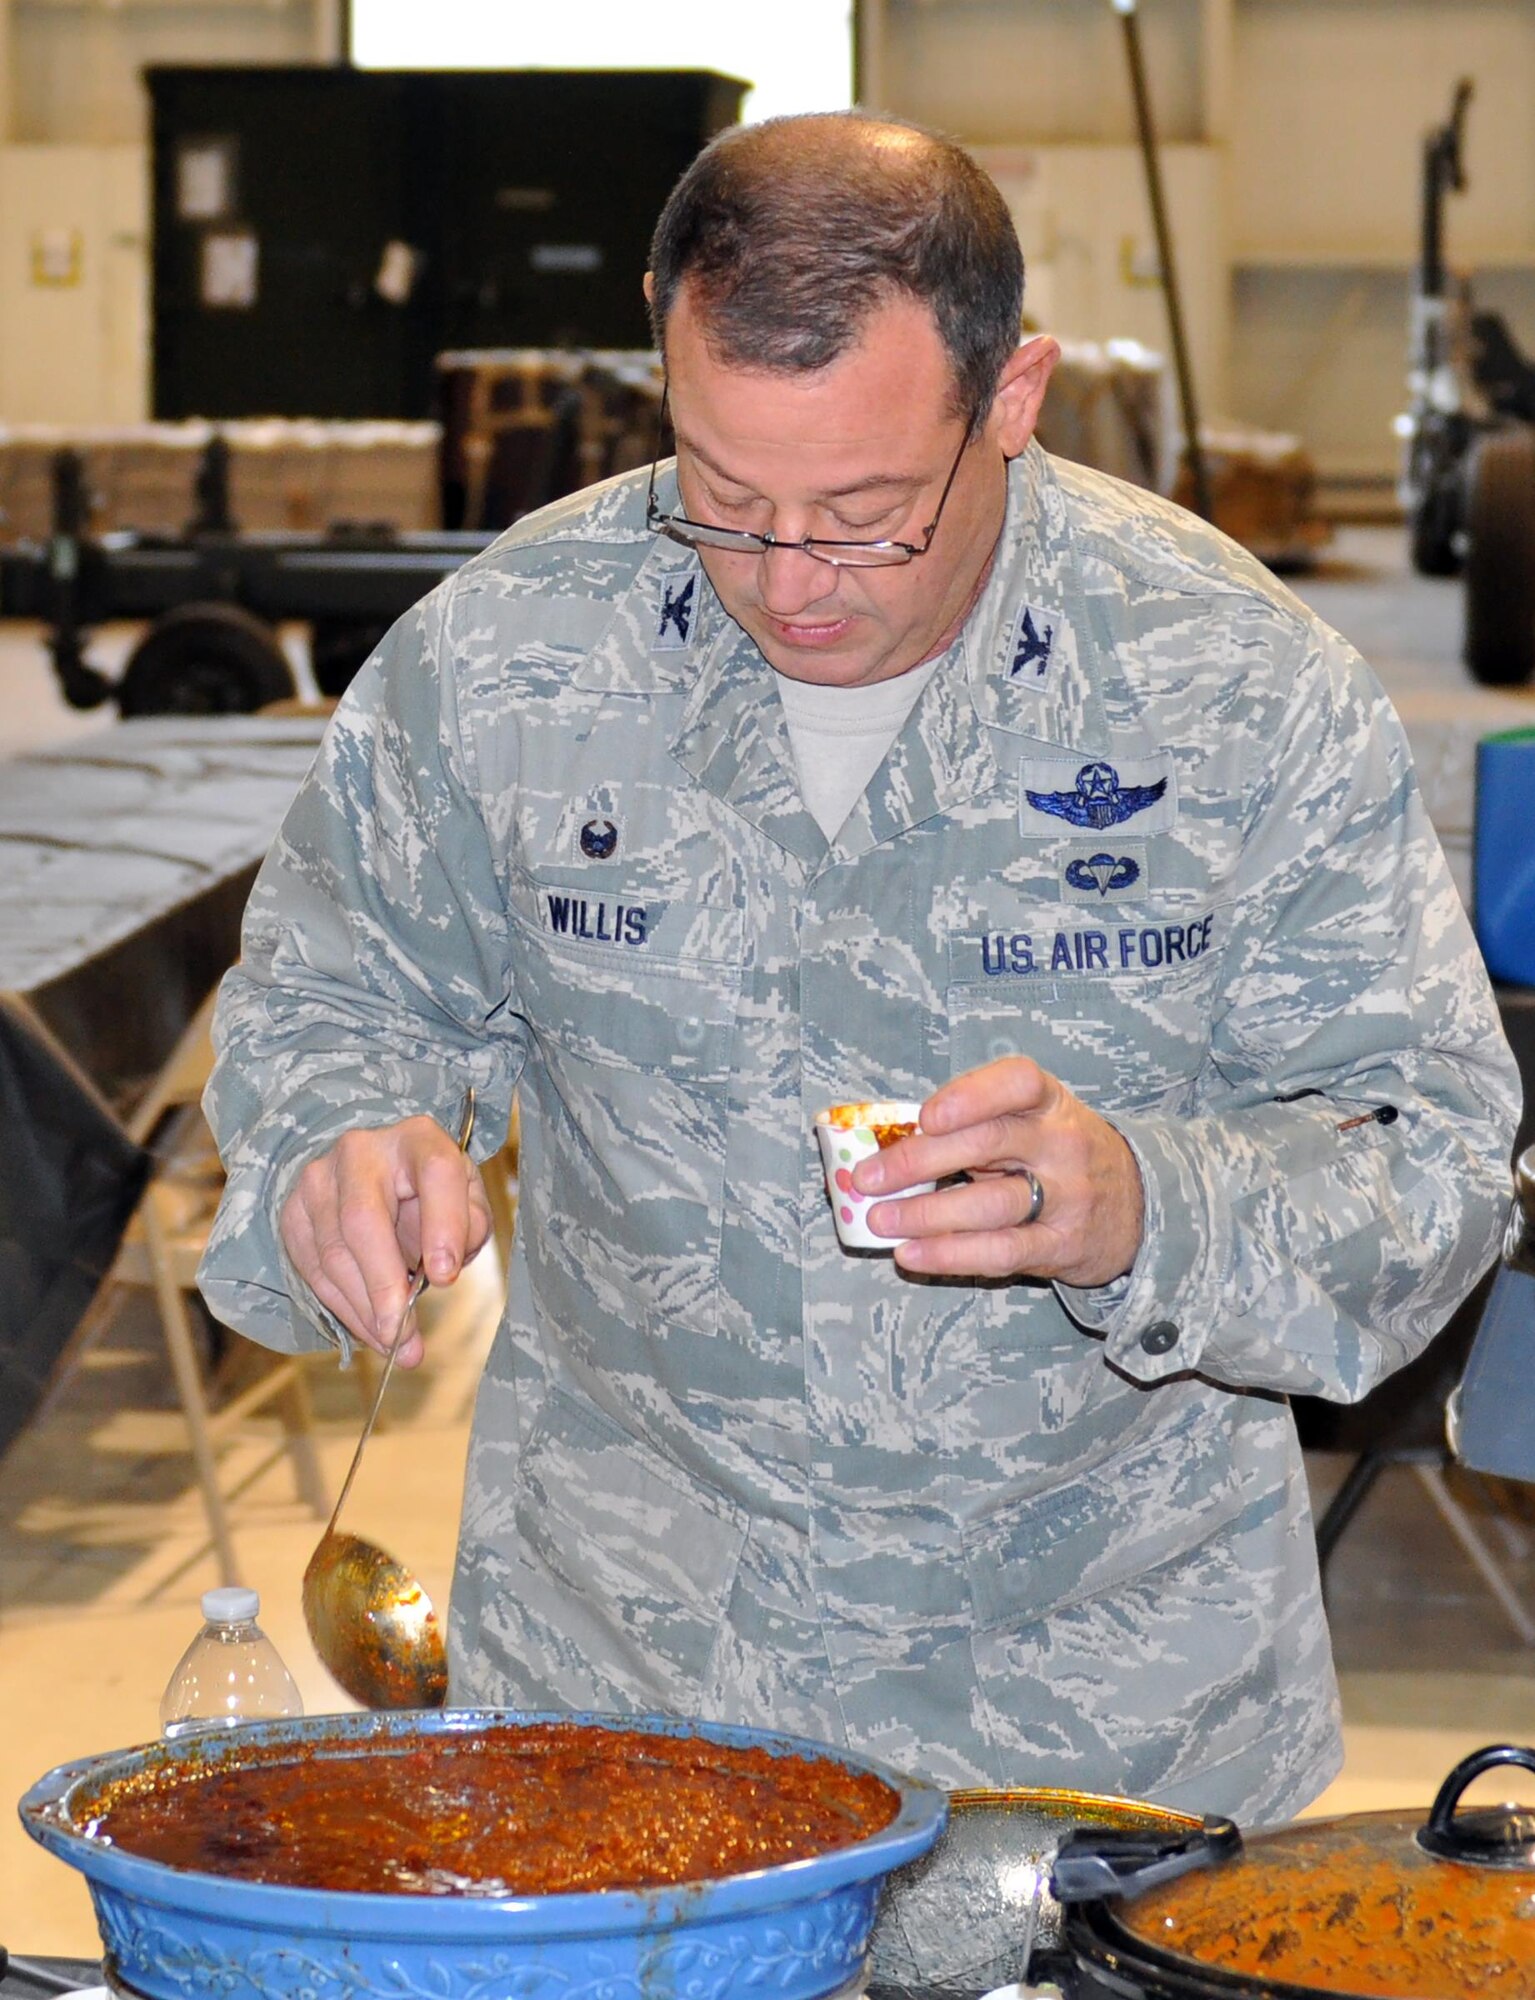 Col. Adam Willis, 445th Airlift Wing commander, samples one of 17 pots of chili while serving as a judge during the 445th Airlift Wing’s 16th Annual Chili Cook-off Oct. 27, 2016. The event raised $400 for the Combined Federal Campaign. (U.S. Air Force photo/Lt. Col. Cynthia Harris)